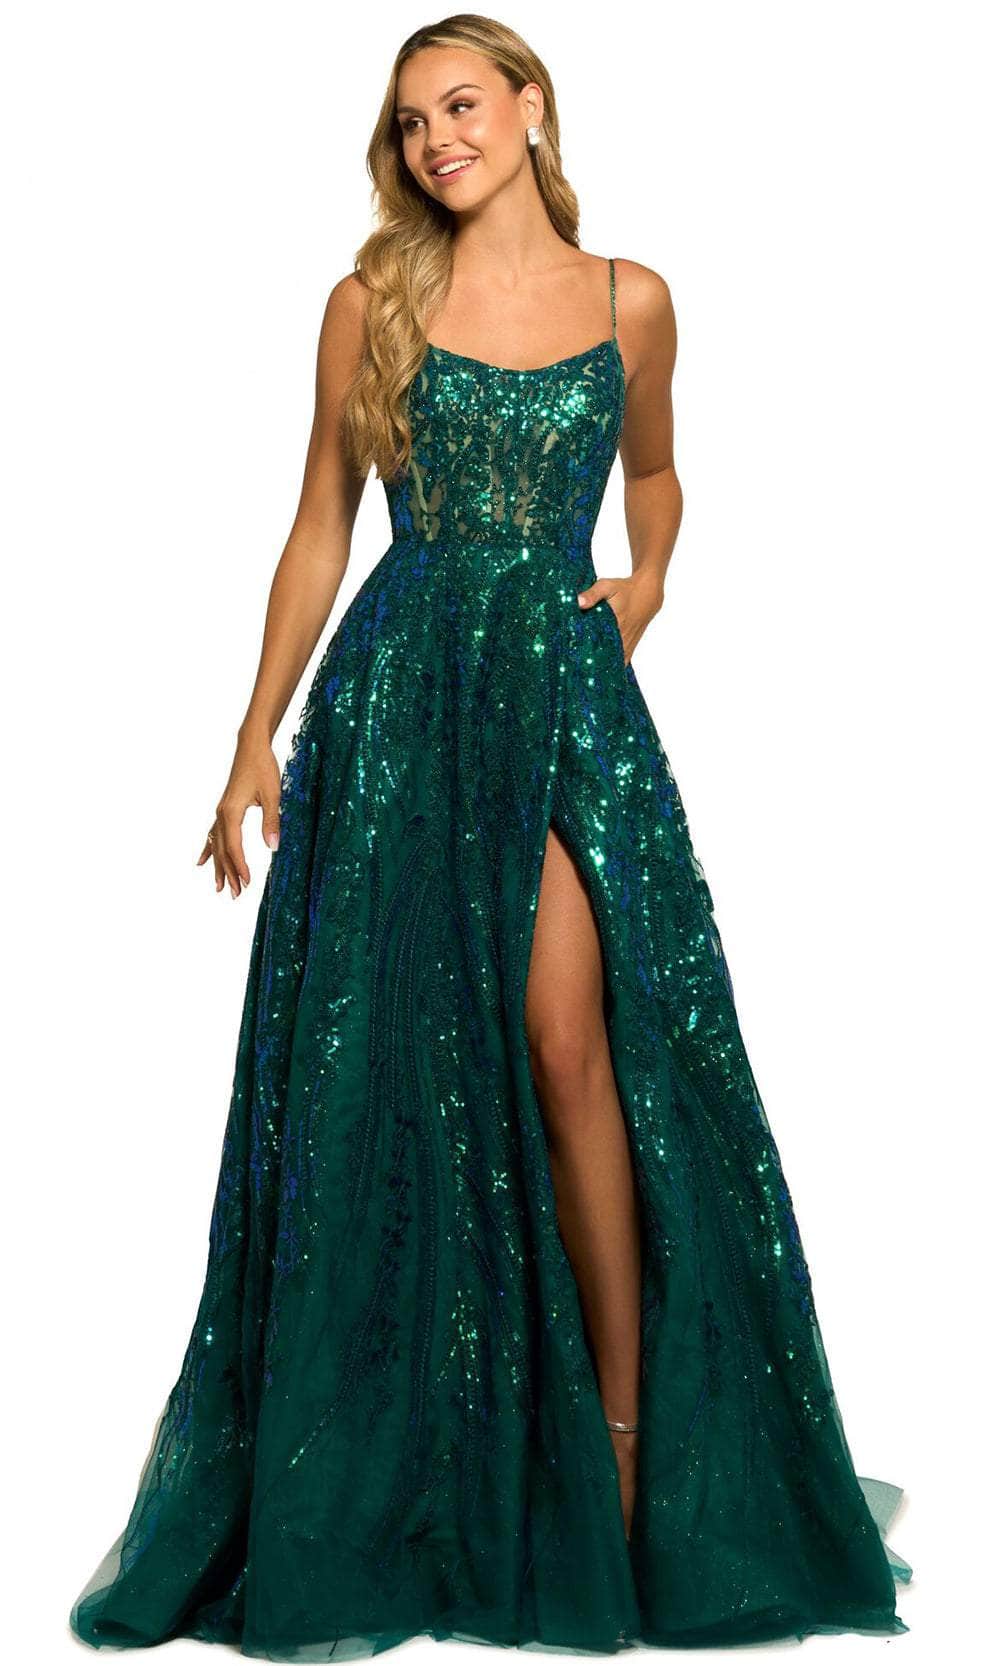 Image of Sherri Hill 55521 - Sequin Lace A-Line Prom Dress